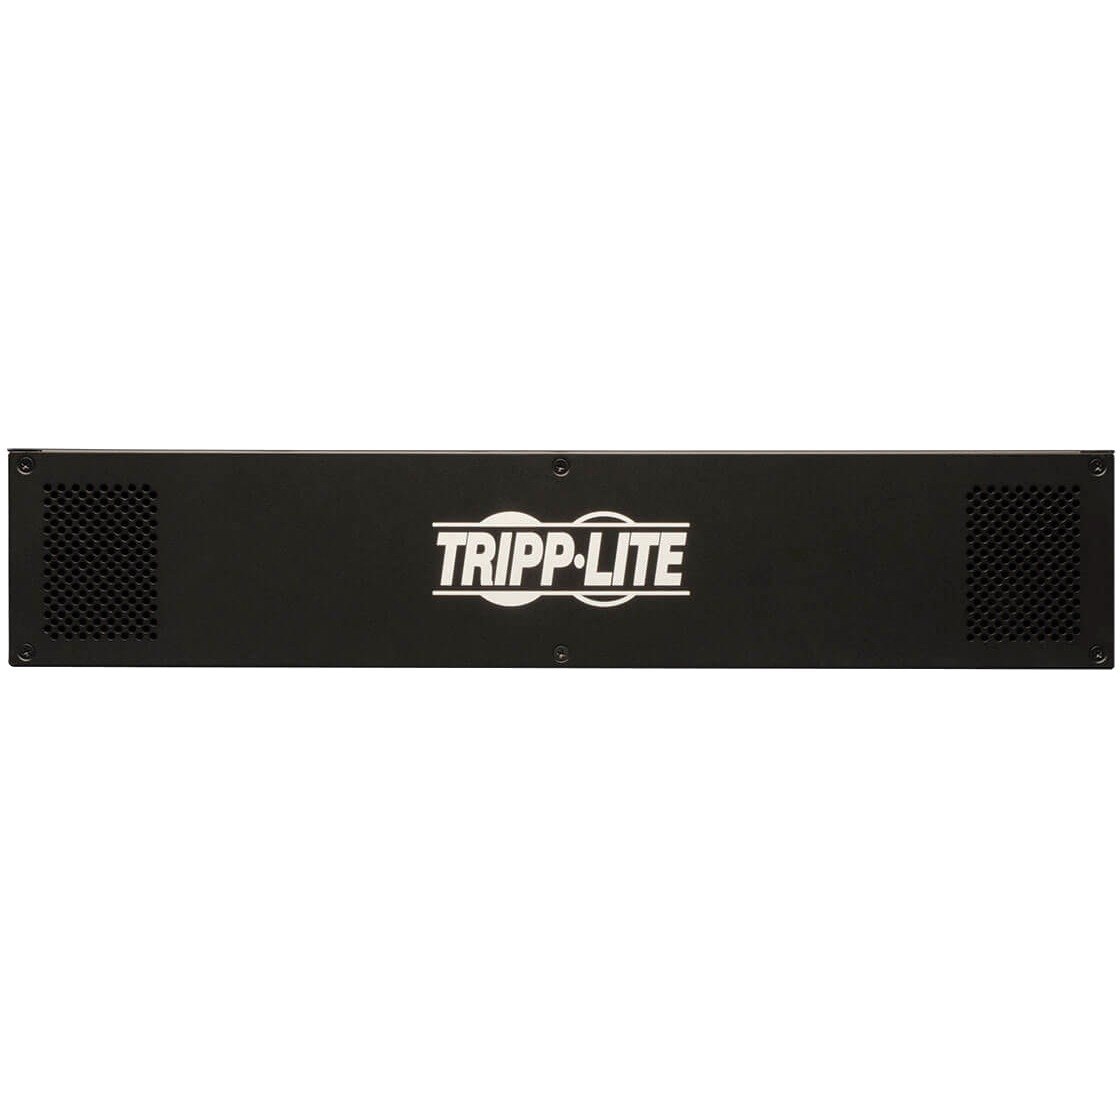 Tripp Lite by Eaton 7.4kW Single-Phase Monitored PDU with LX Platform Interface, 230V Outlets (12-C13, 4-C19), IEC-309 32A Blue, 12 ft. (3.66 m) Cord, 2U Rack-Mount, TAA